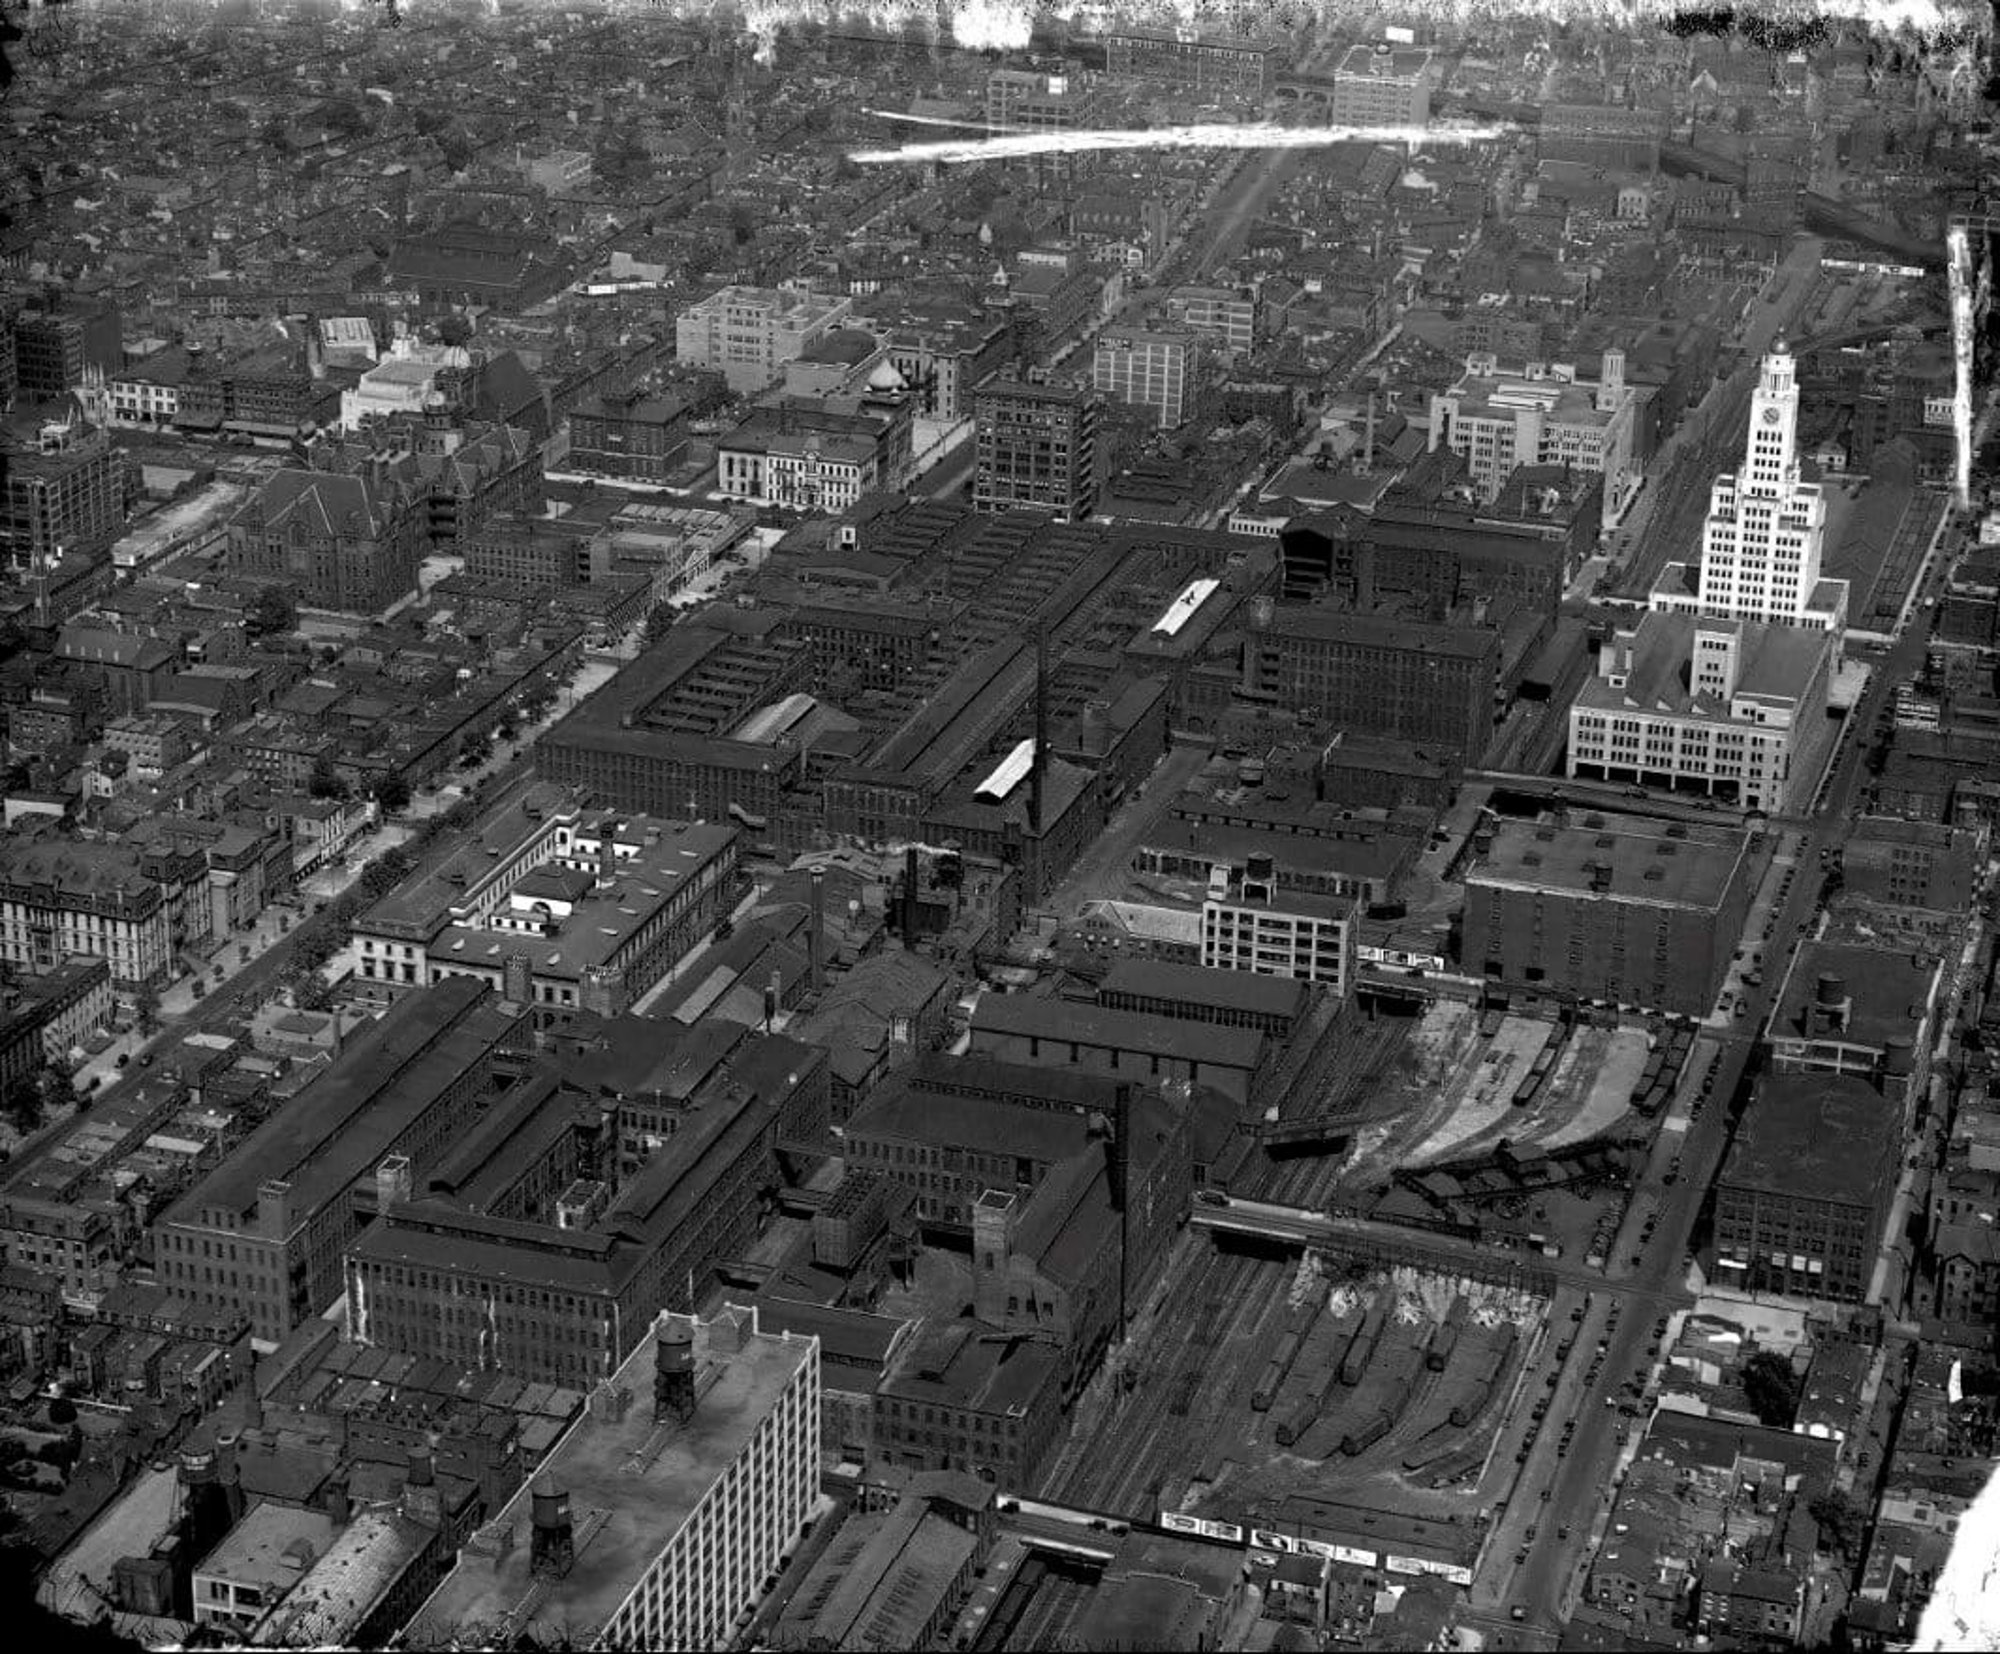 Aerial view of the Baldwin Locomotive Works, 1928, located at Broad and Spring Garden Streets in Philadelphia, just north of today’s Comcast Technology Center site. © Image courtesy of the Library Company of Philadelphia